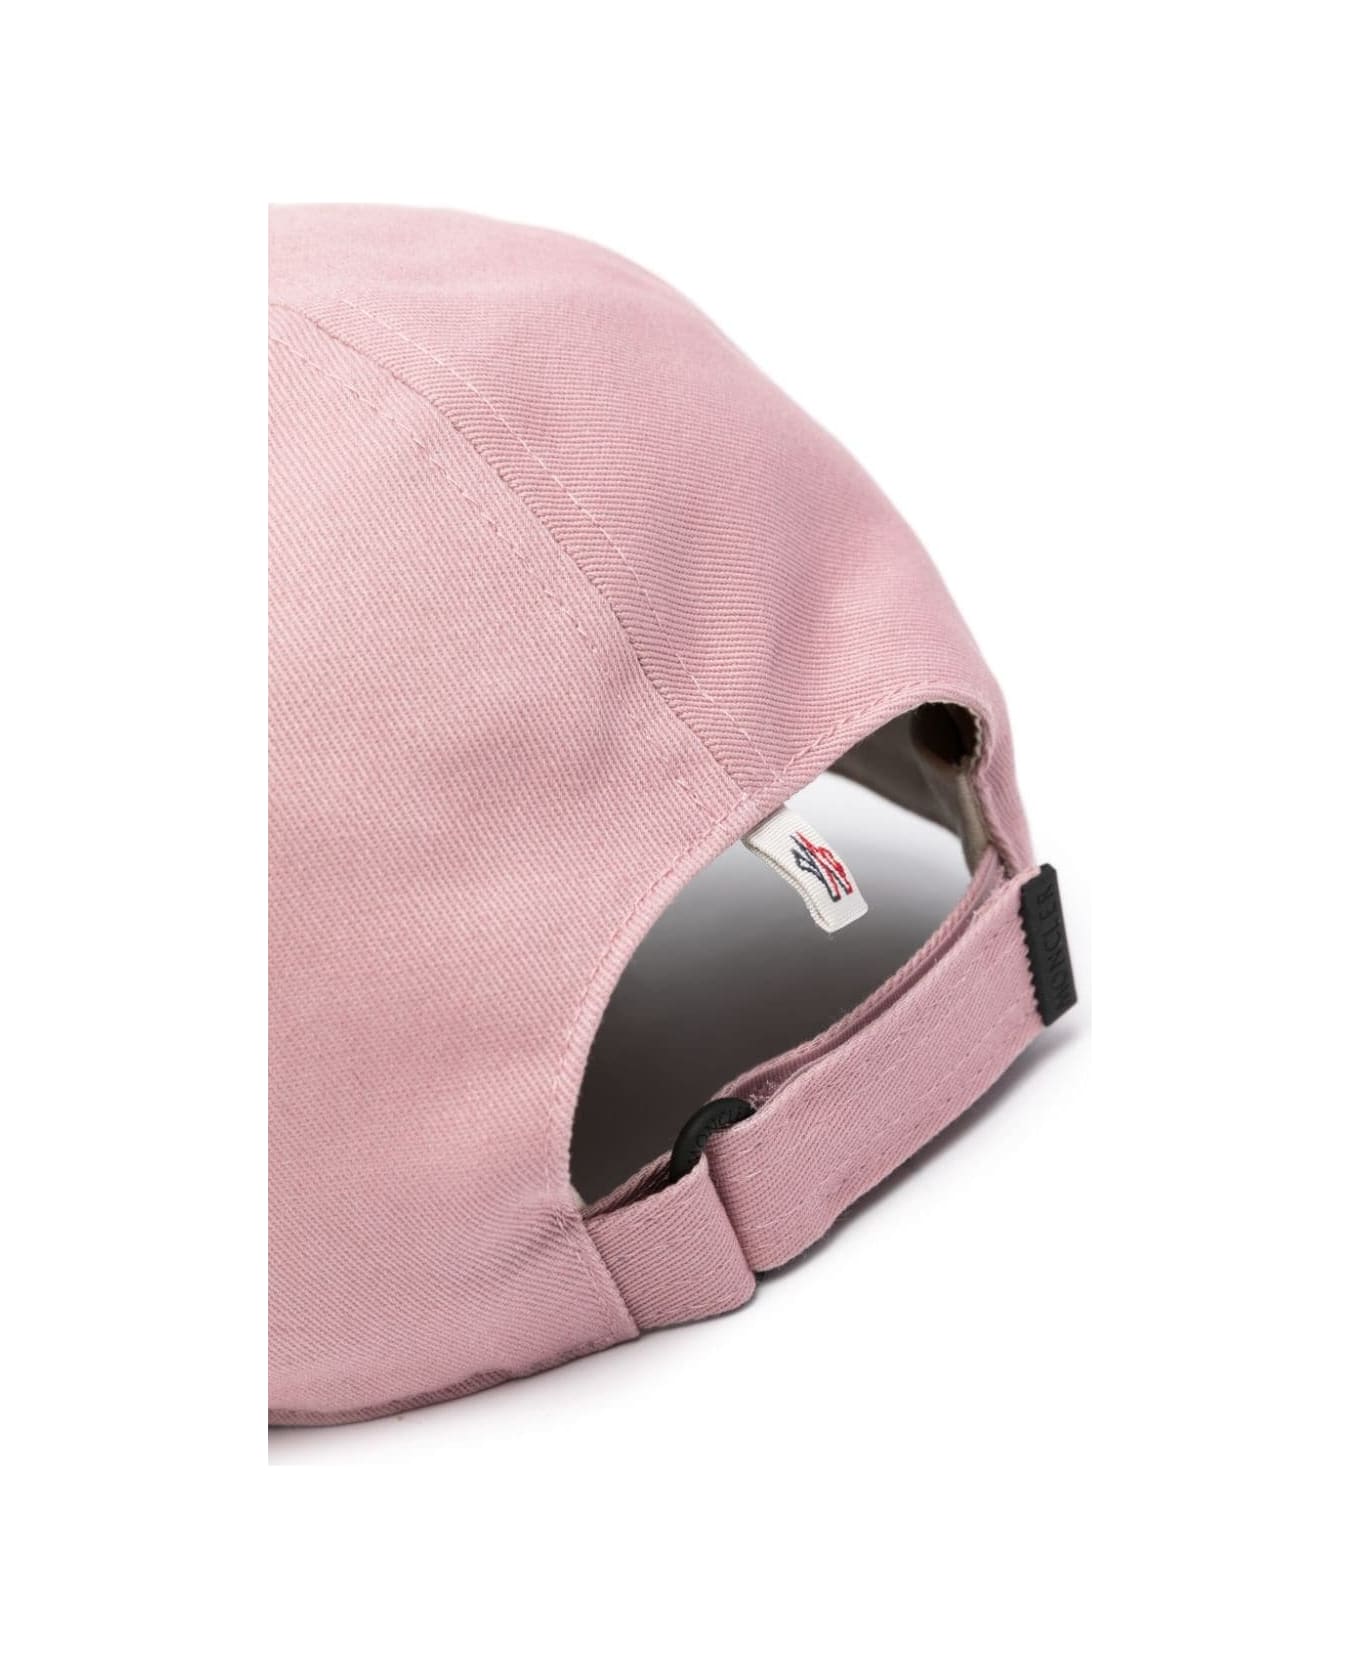 Moncler Grenoble Pink Baseball Hat With Embossed Logo - Pink